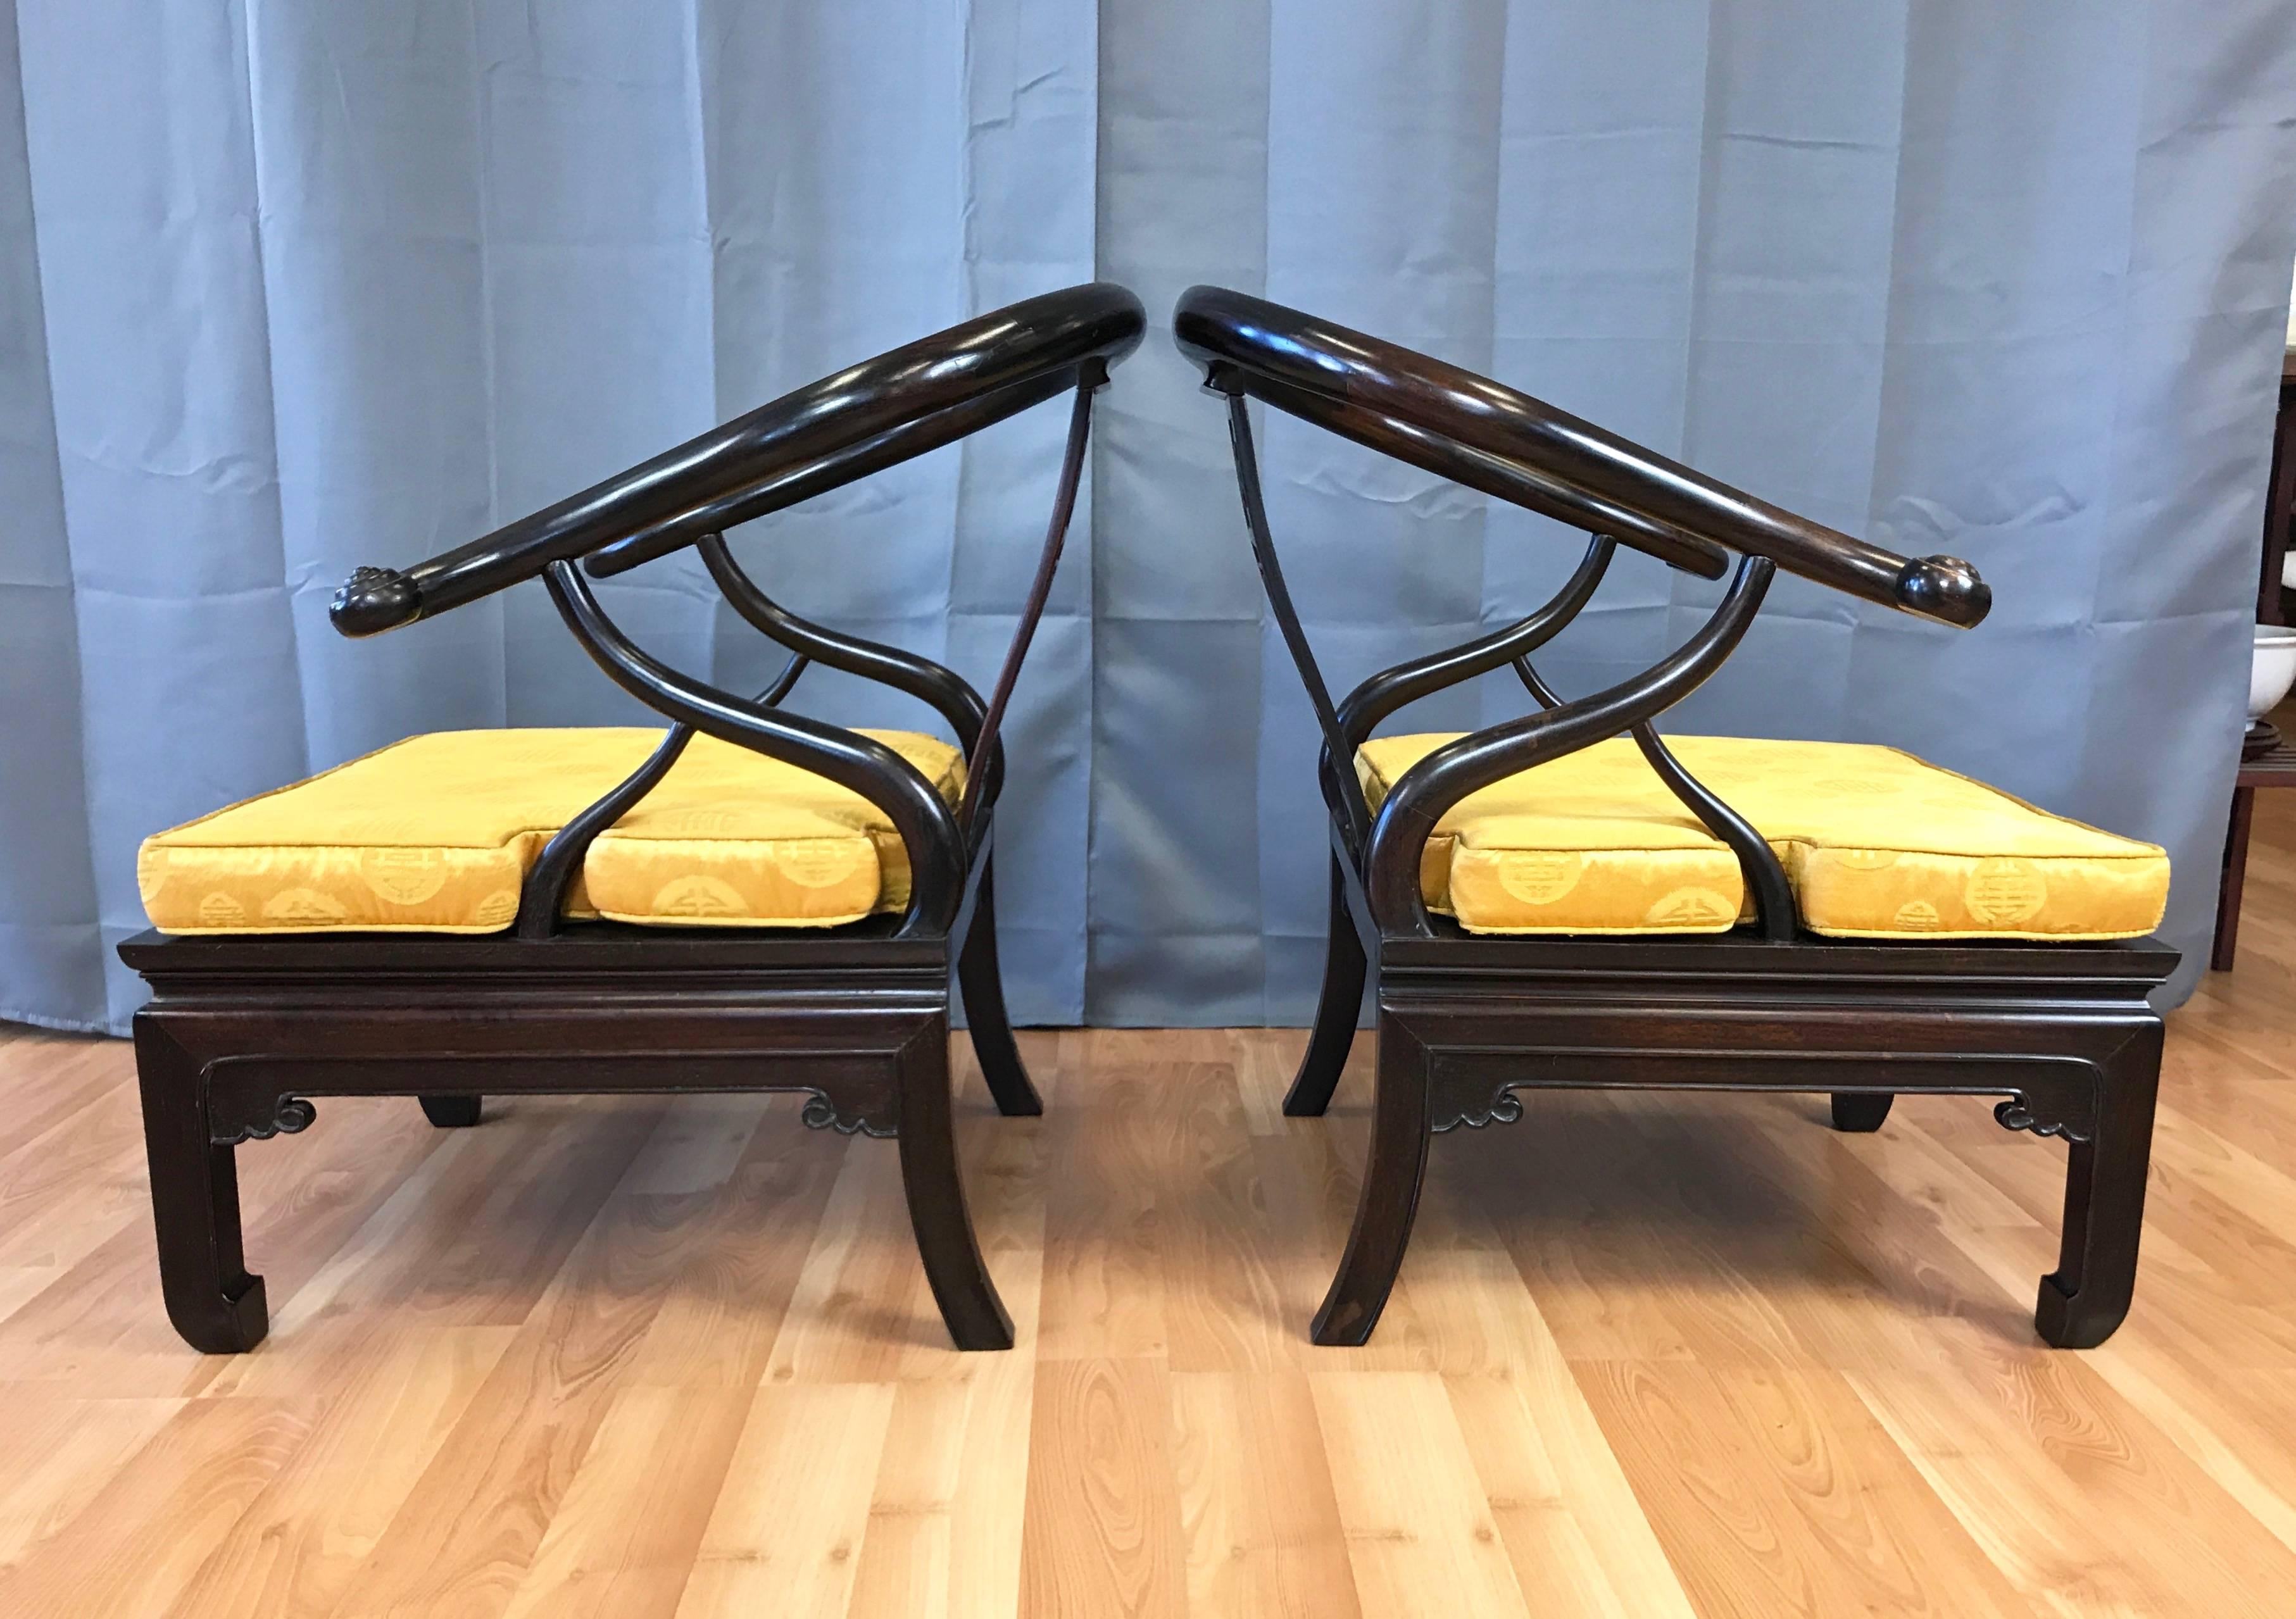 An exceptional pair of generously proportioned Chinese horseshoe chow chairs in stained solid rosewood, dating from shortly after the end of the Qing dynasty.

Sinuous back, arms and sides have an Art Nouveau feel. Skillfully-carved embellishments